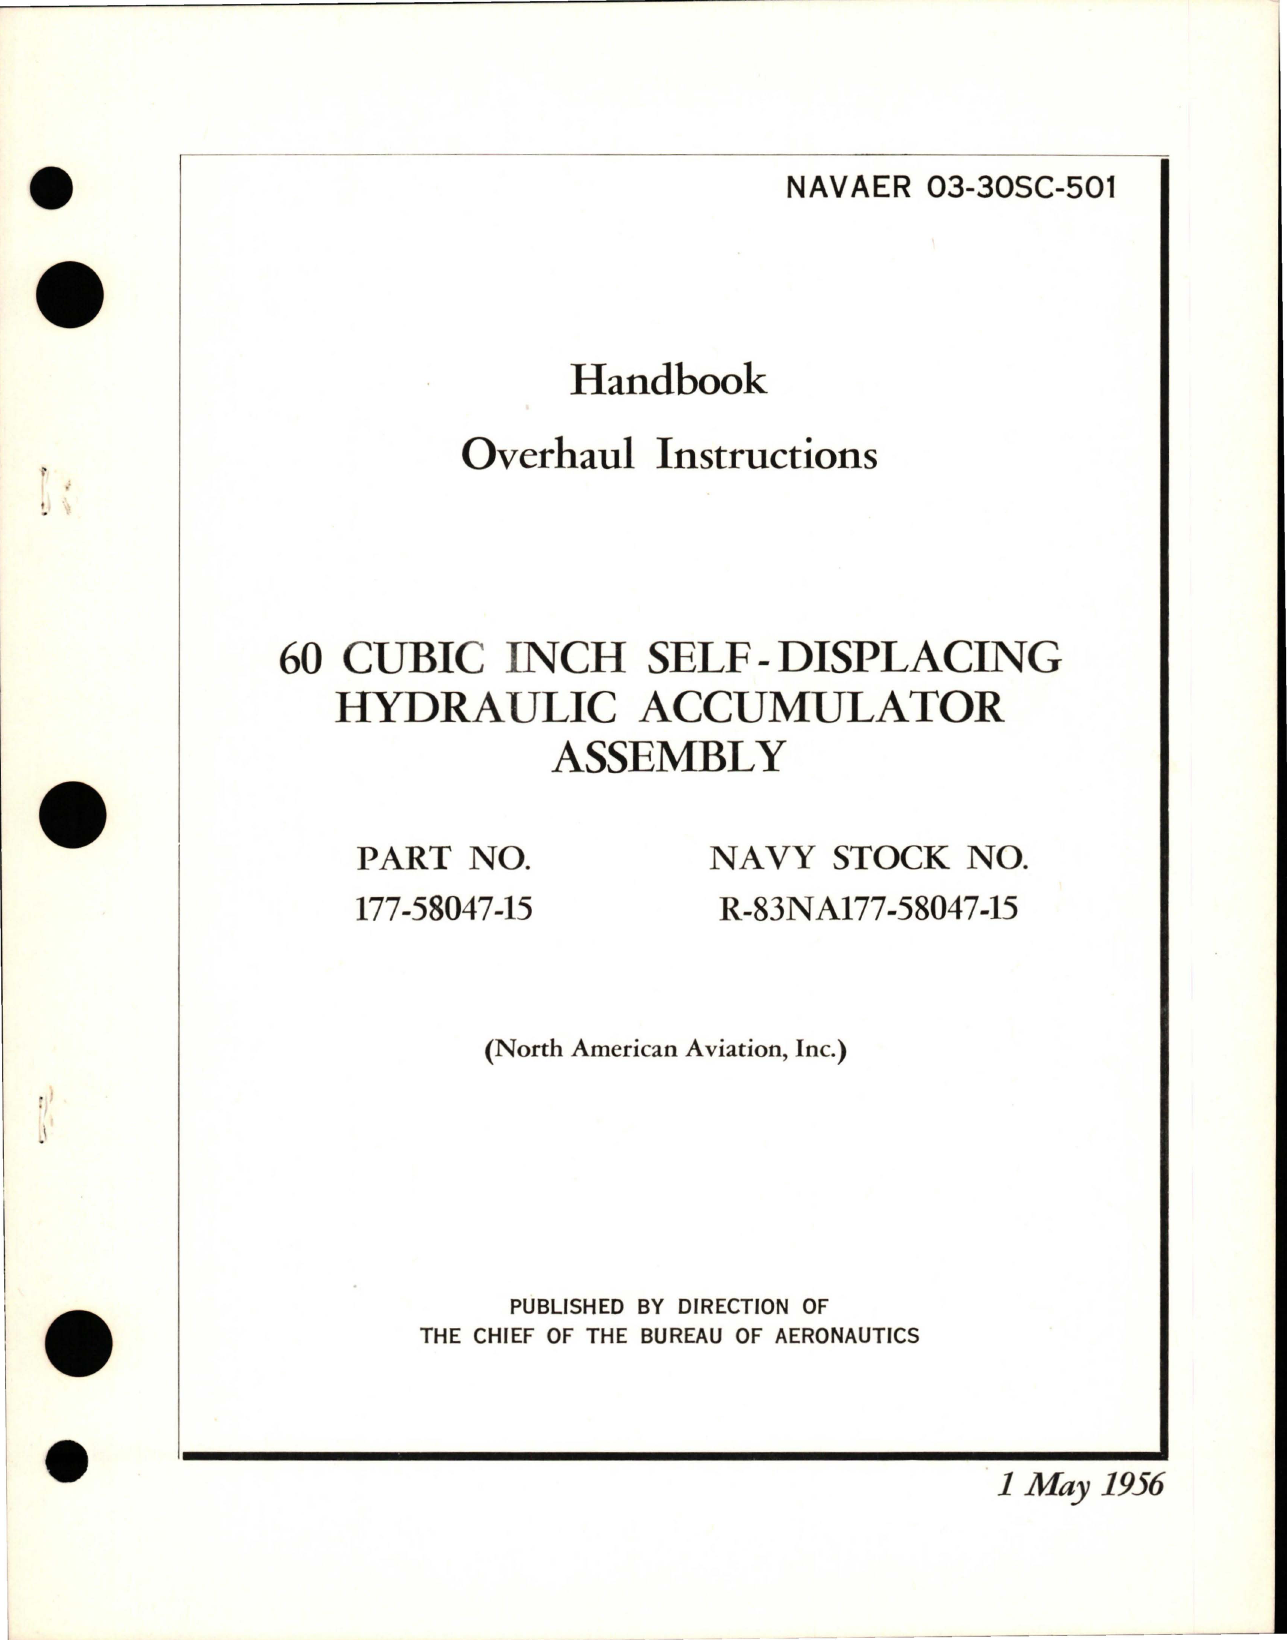 Sample page 1 from AirCorps Library document: Overhaul Instructions for 60 Cubic Inch Self-Displacing Hydraulic Accumulator Assembly - Part 177-58047-15 